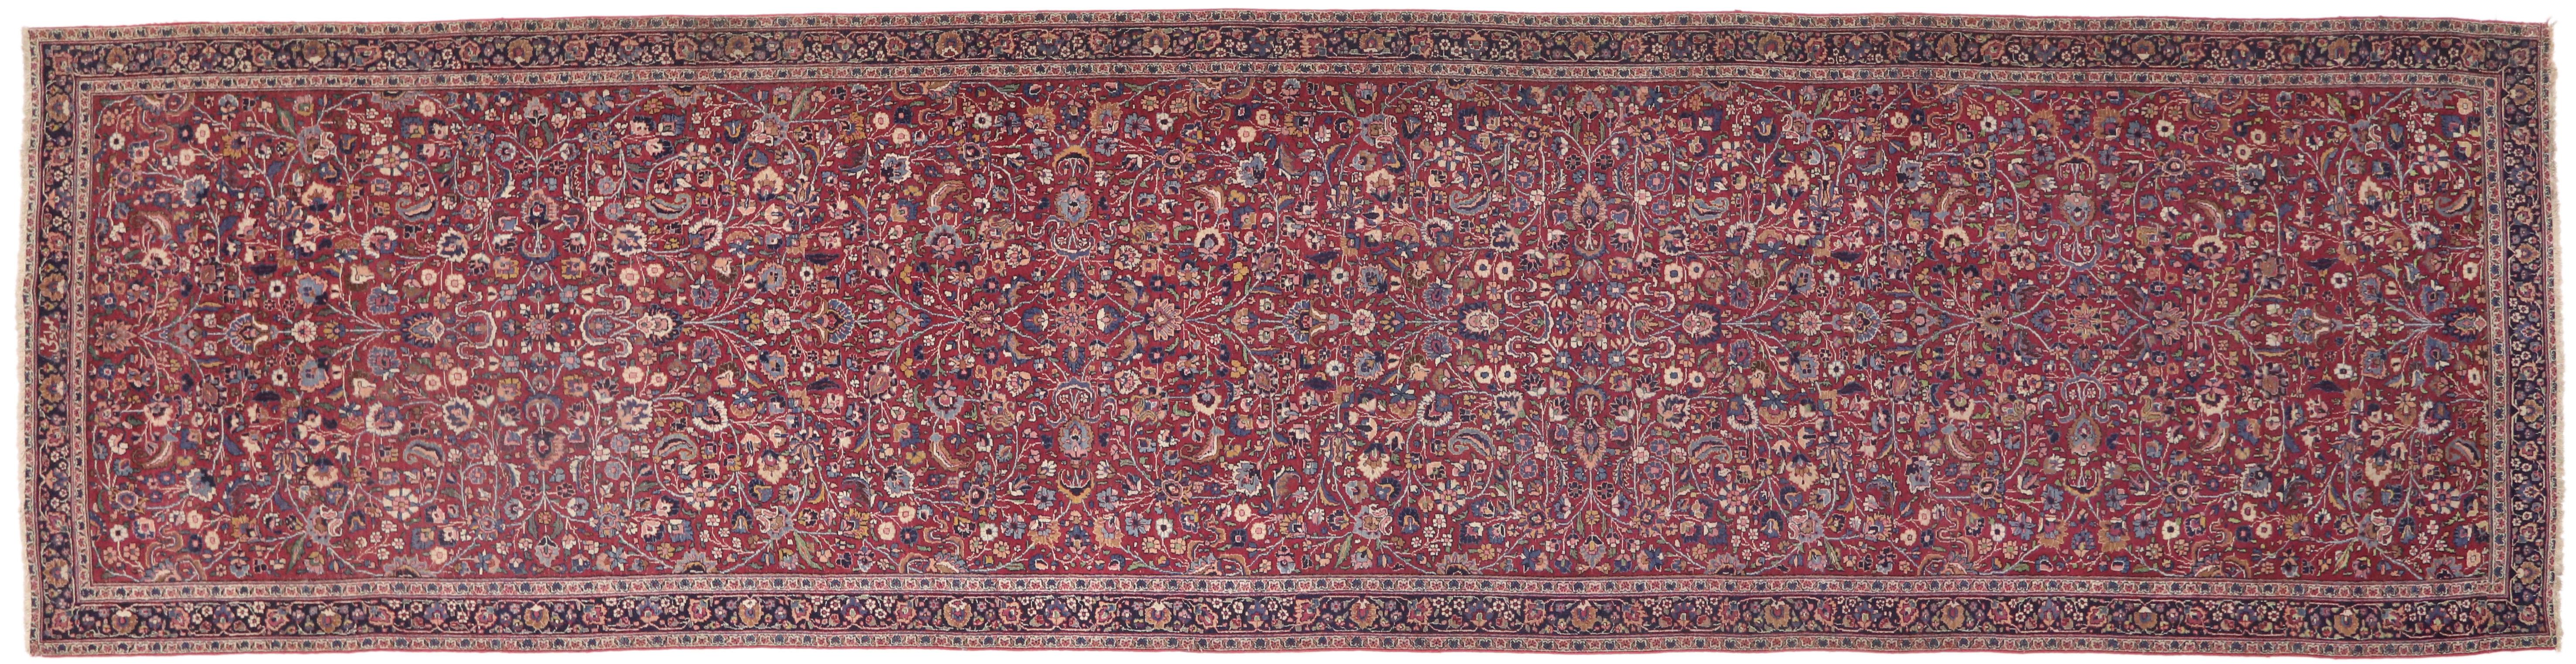 Antique Persian Mashhad Runner with Old World Style, Extra Long Hallway Runner For Sale 4